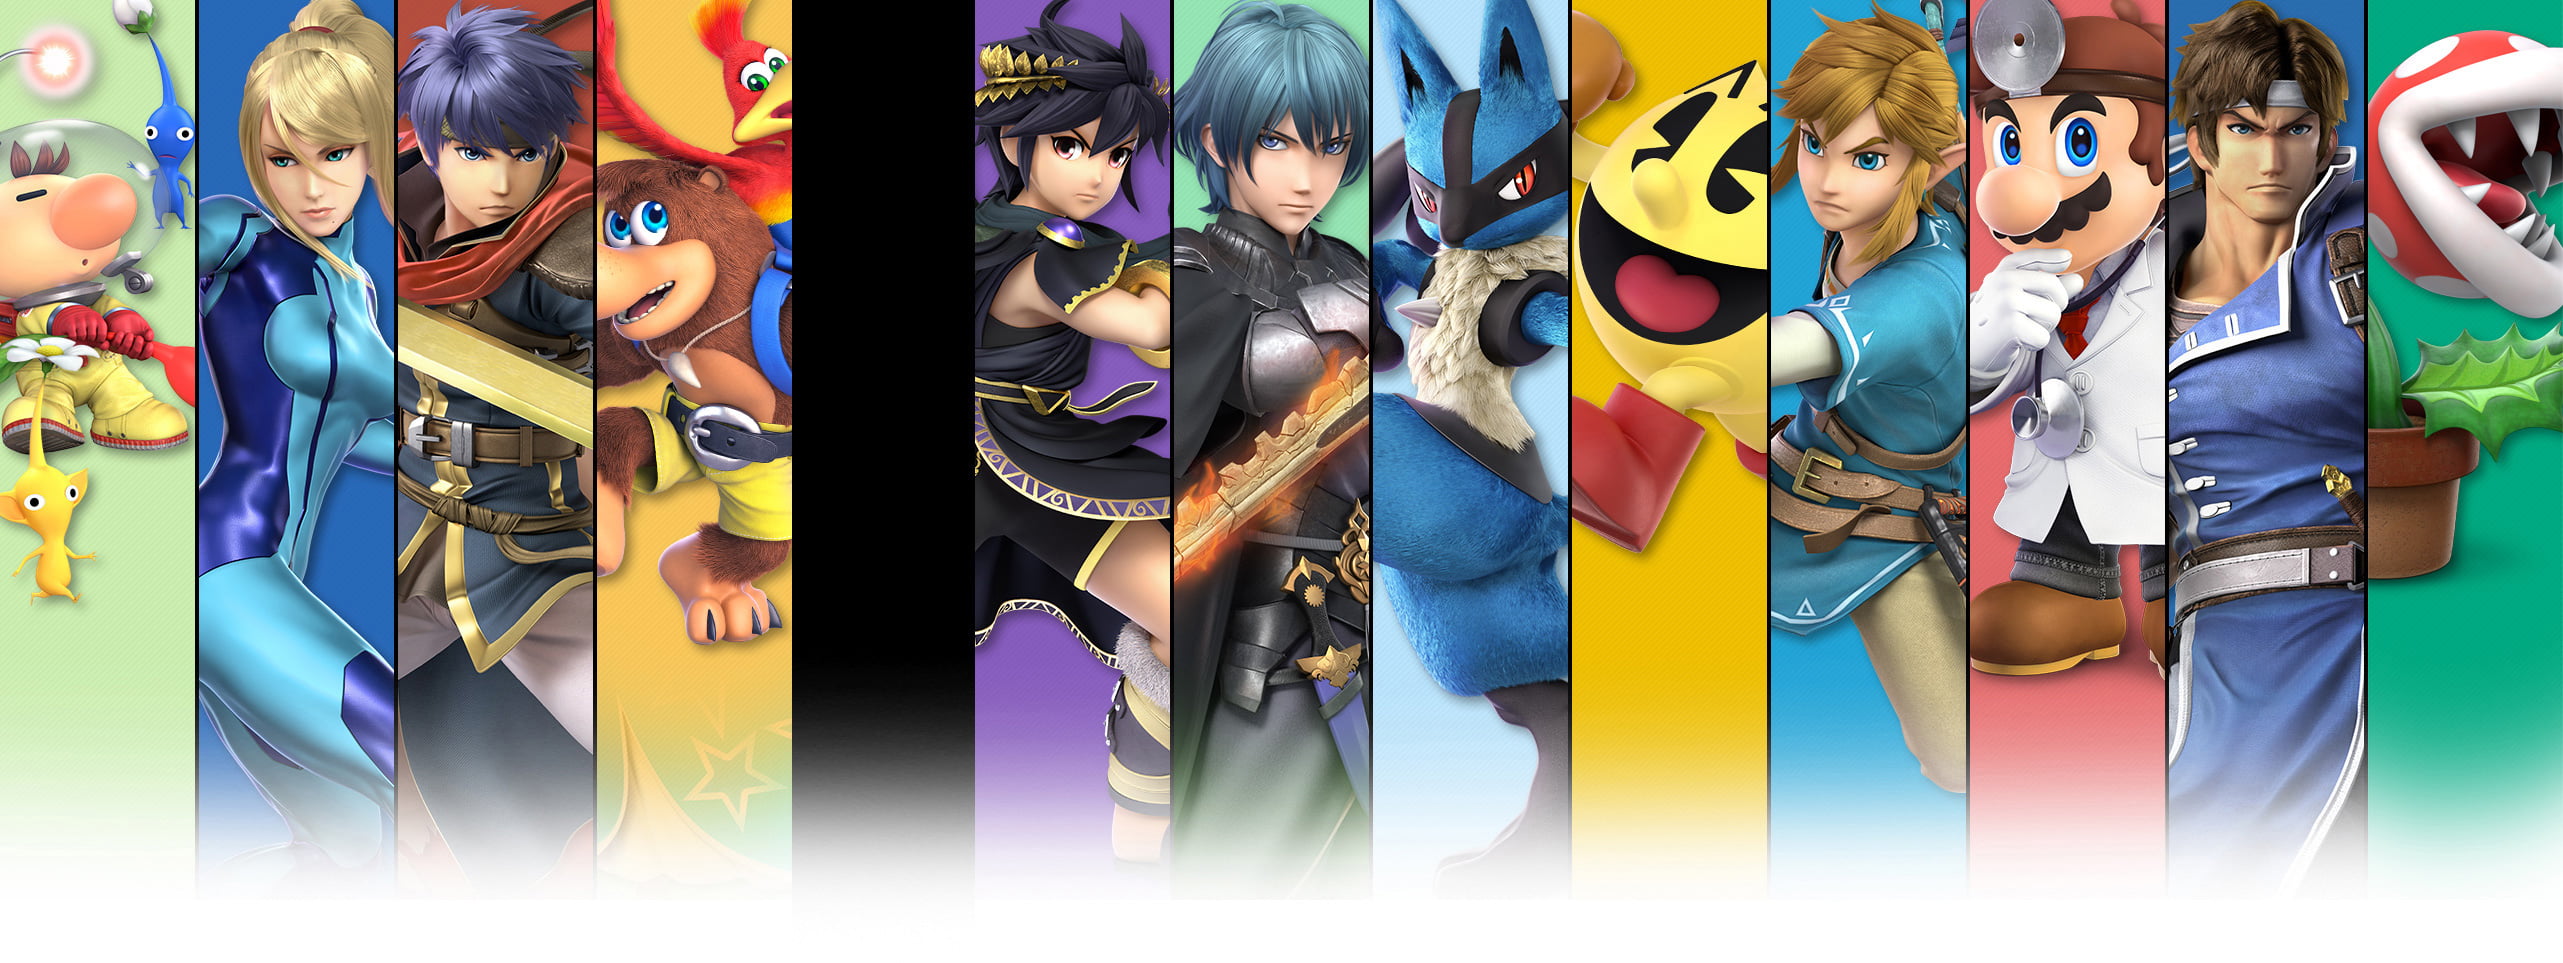 Fighters | Super Smash Bros. Ultimate for the Nintendo Switch System |  Official Site